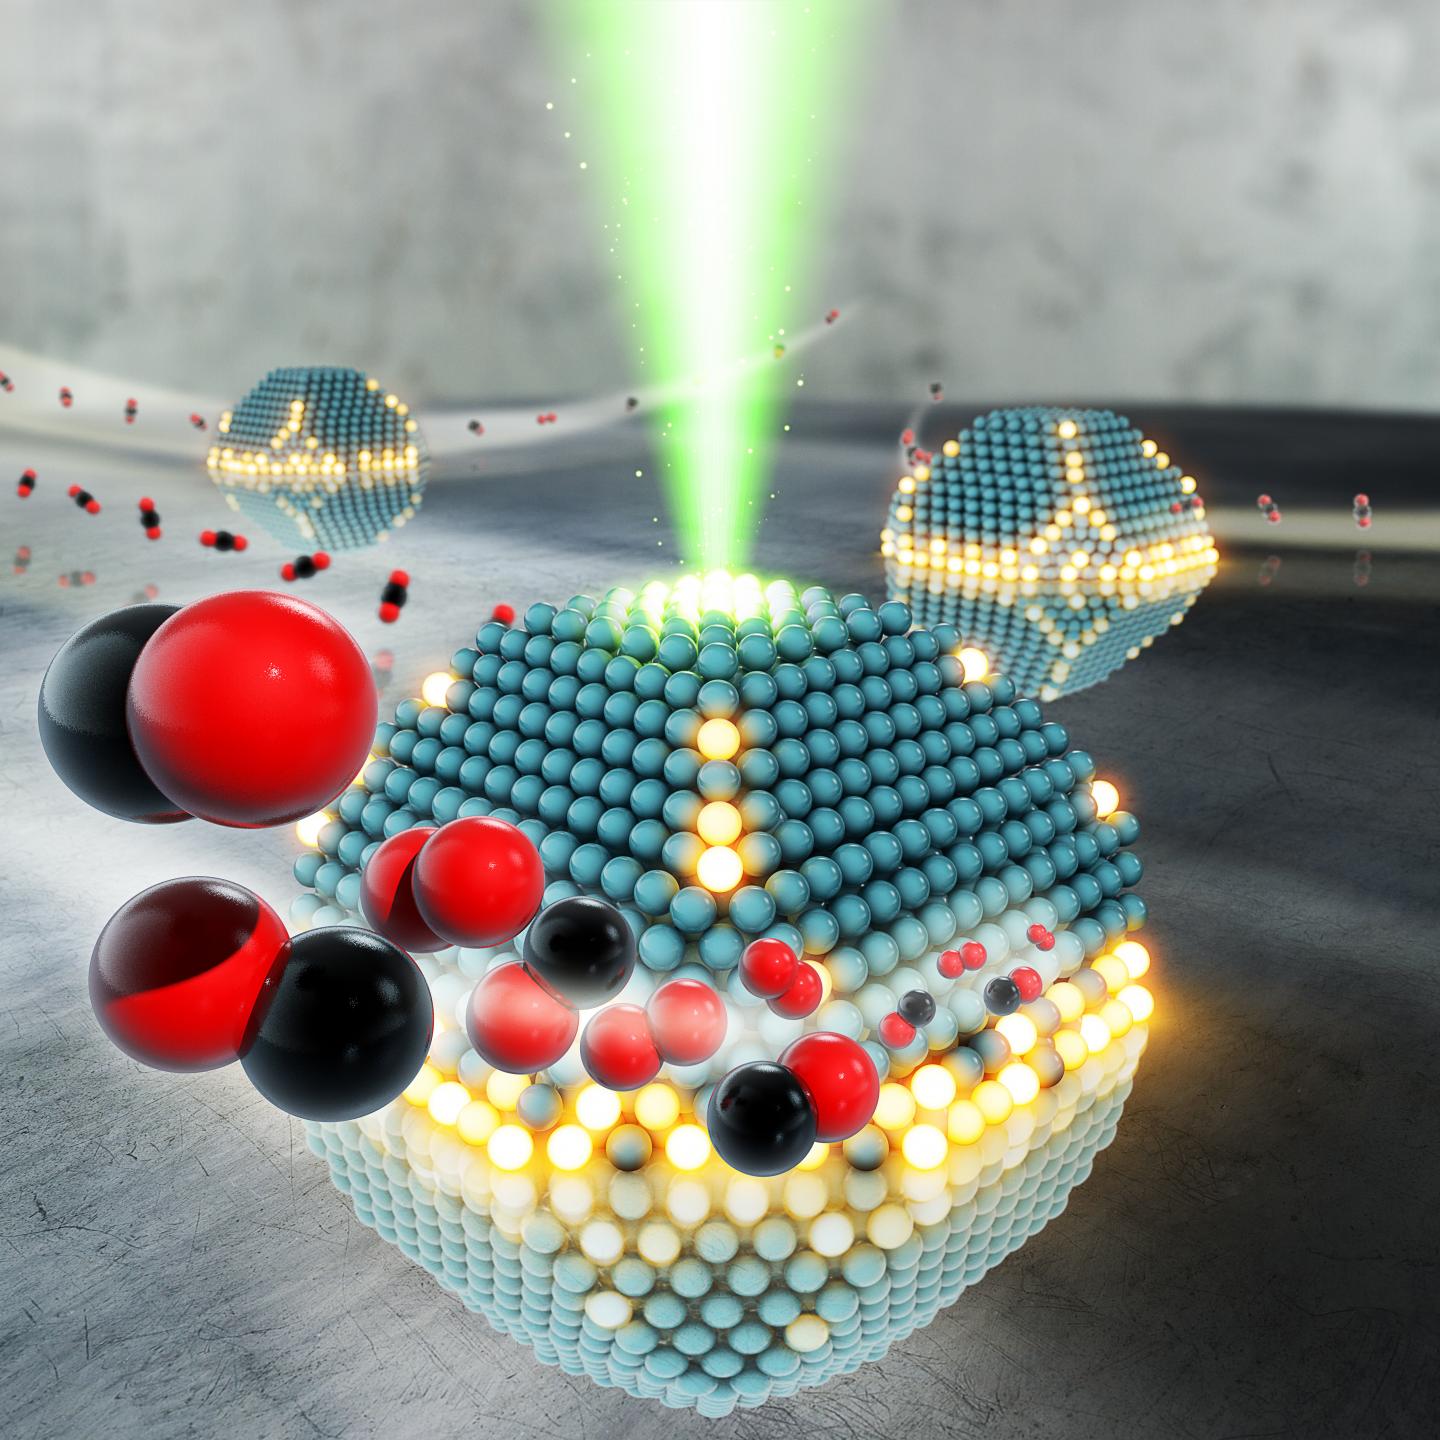 Fine-Tuning at the Atomic Level Can Result in Better Catalysts